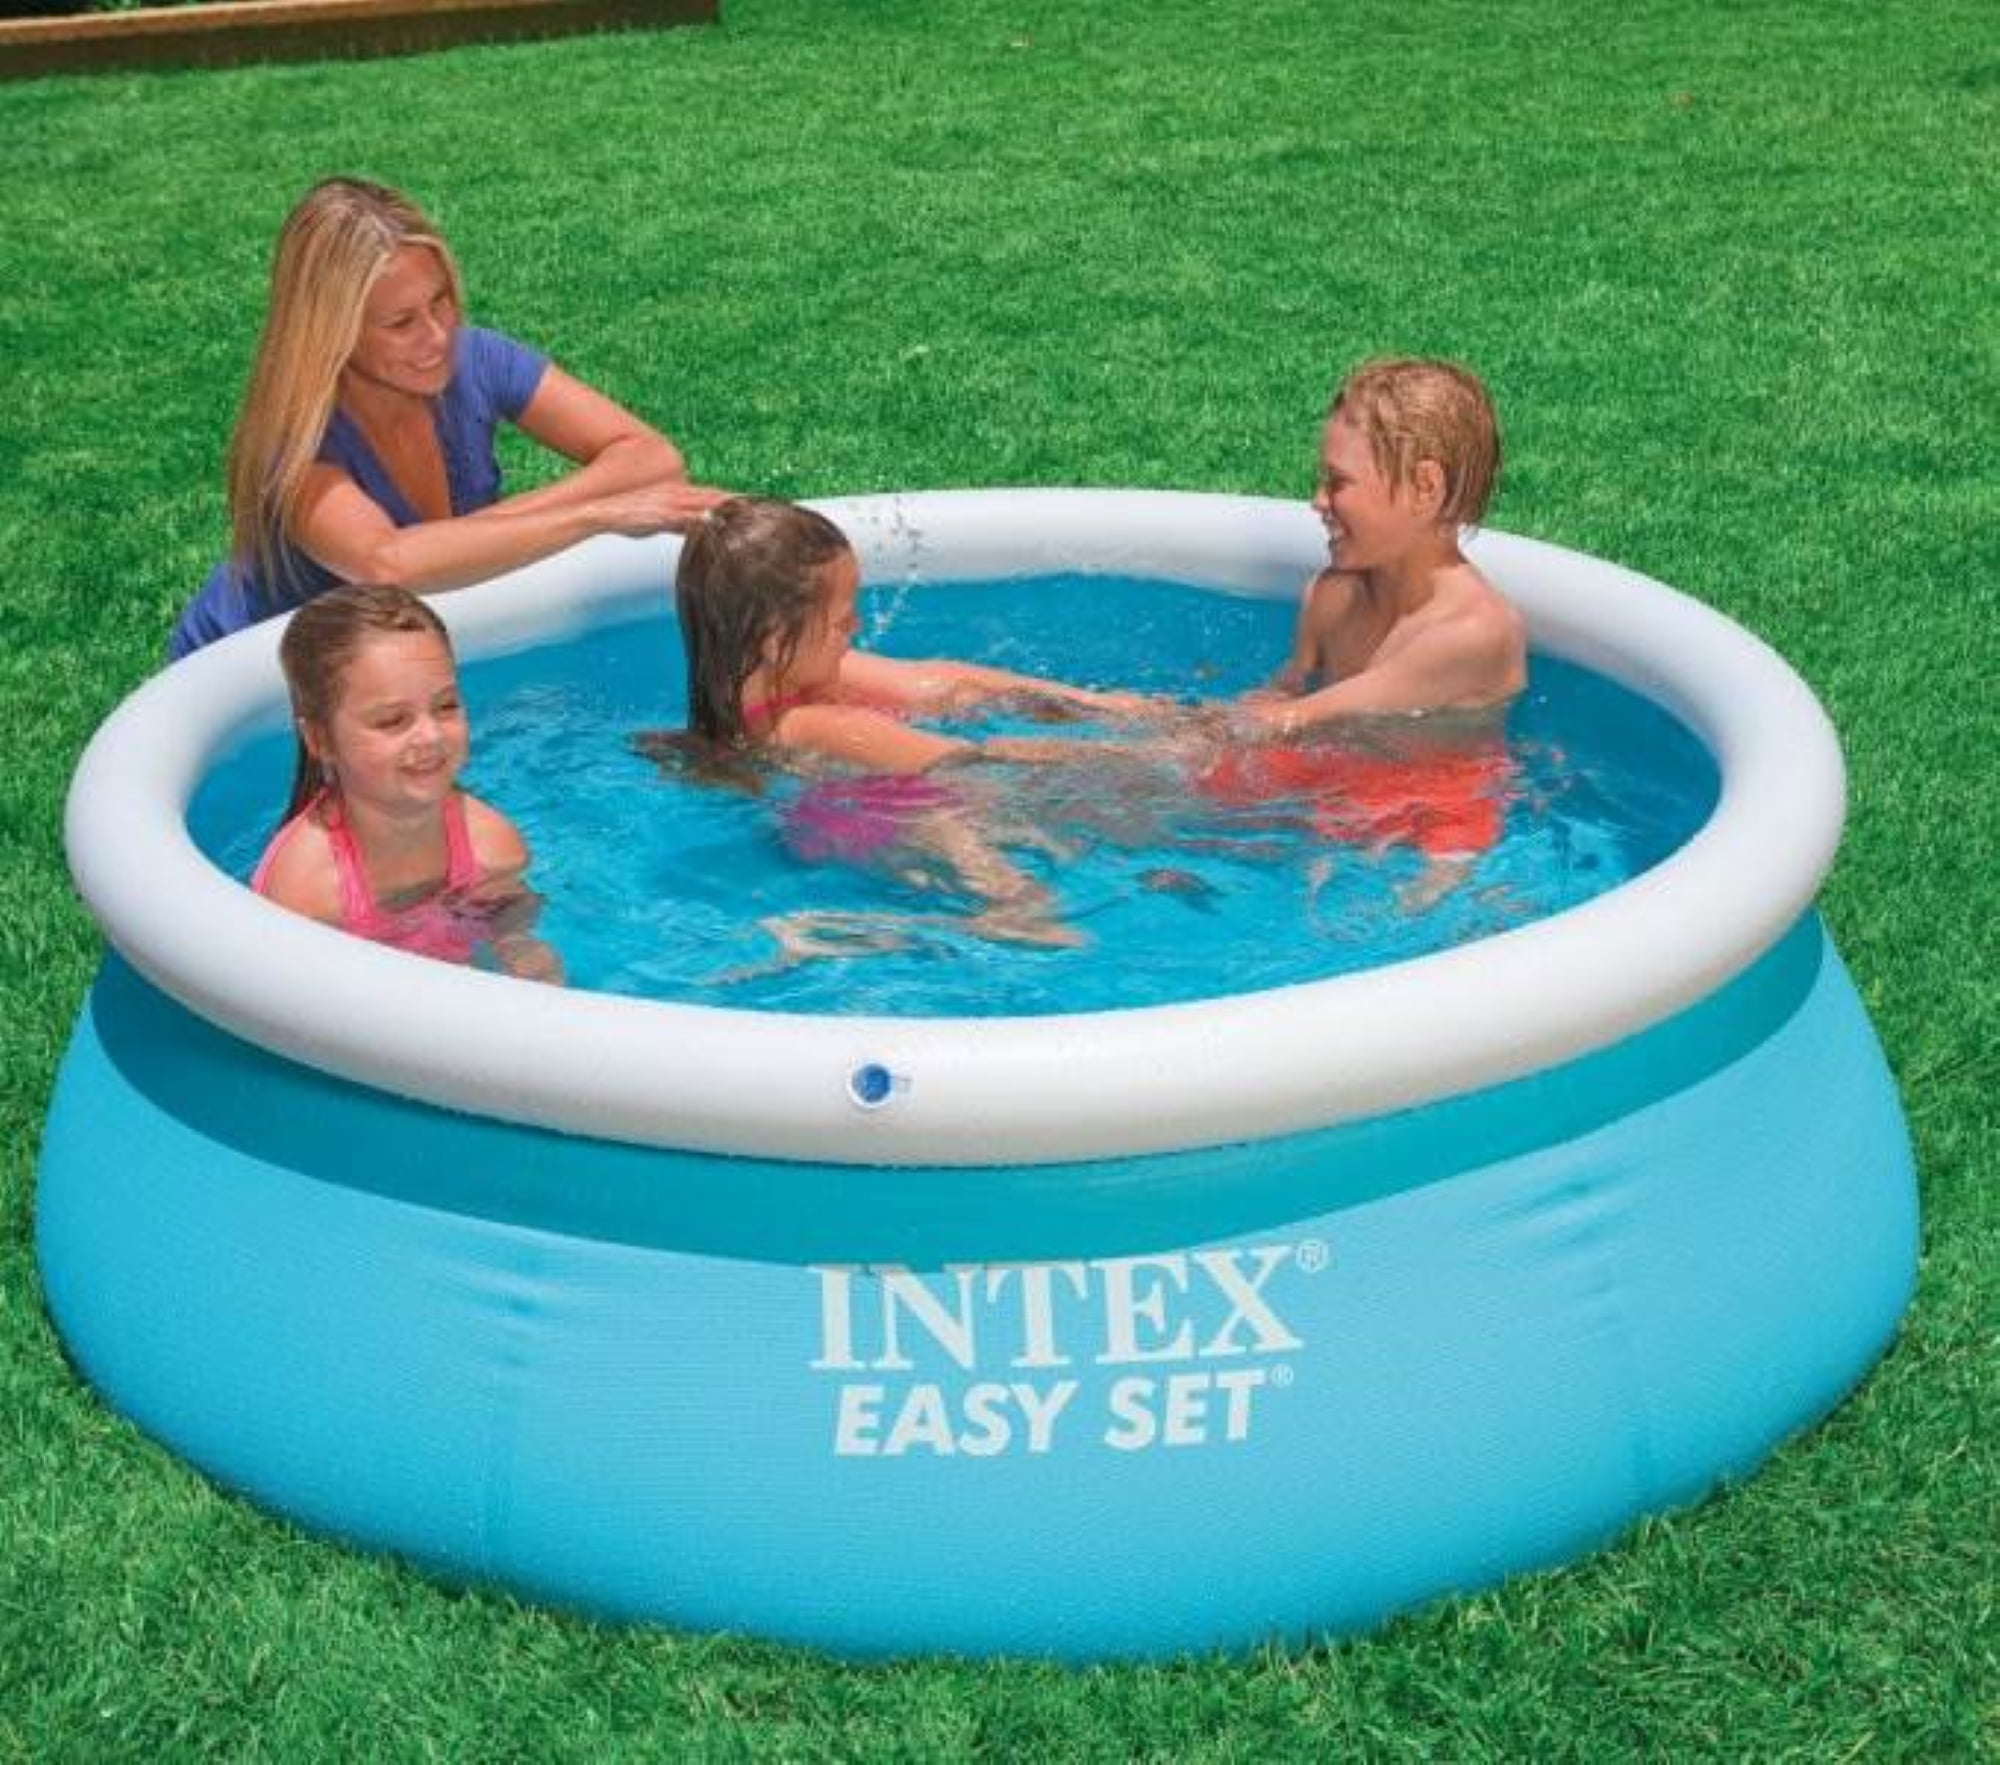 environ 50.80 cm 6 FT X 20 in environ 1.83 m Intex Easy Set gonflable piscine GREAT FUN FOR KIDS 28101 Entièrement neuf dans sa boîte 